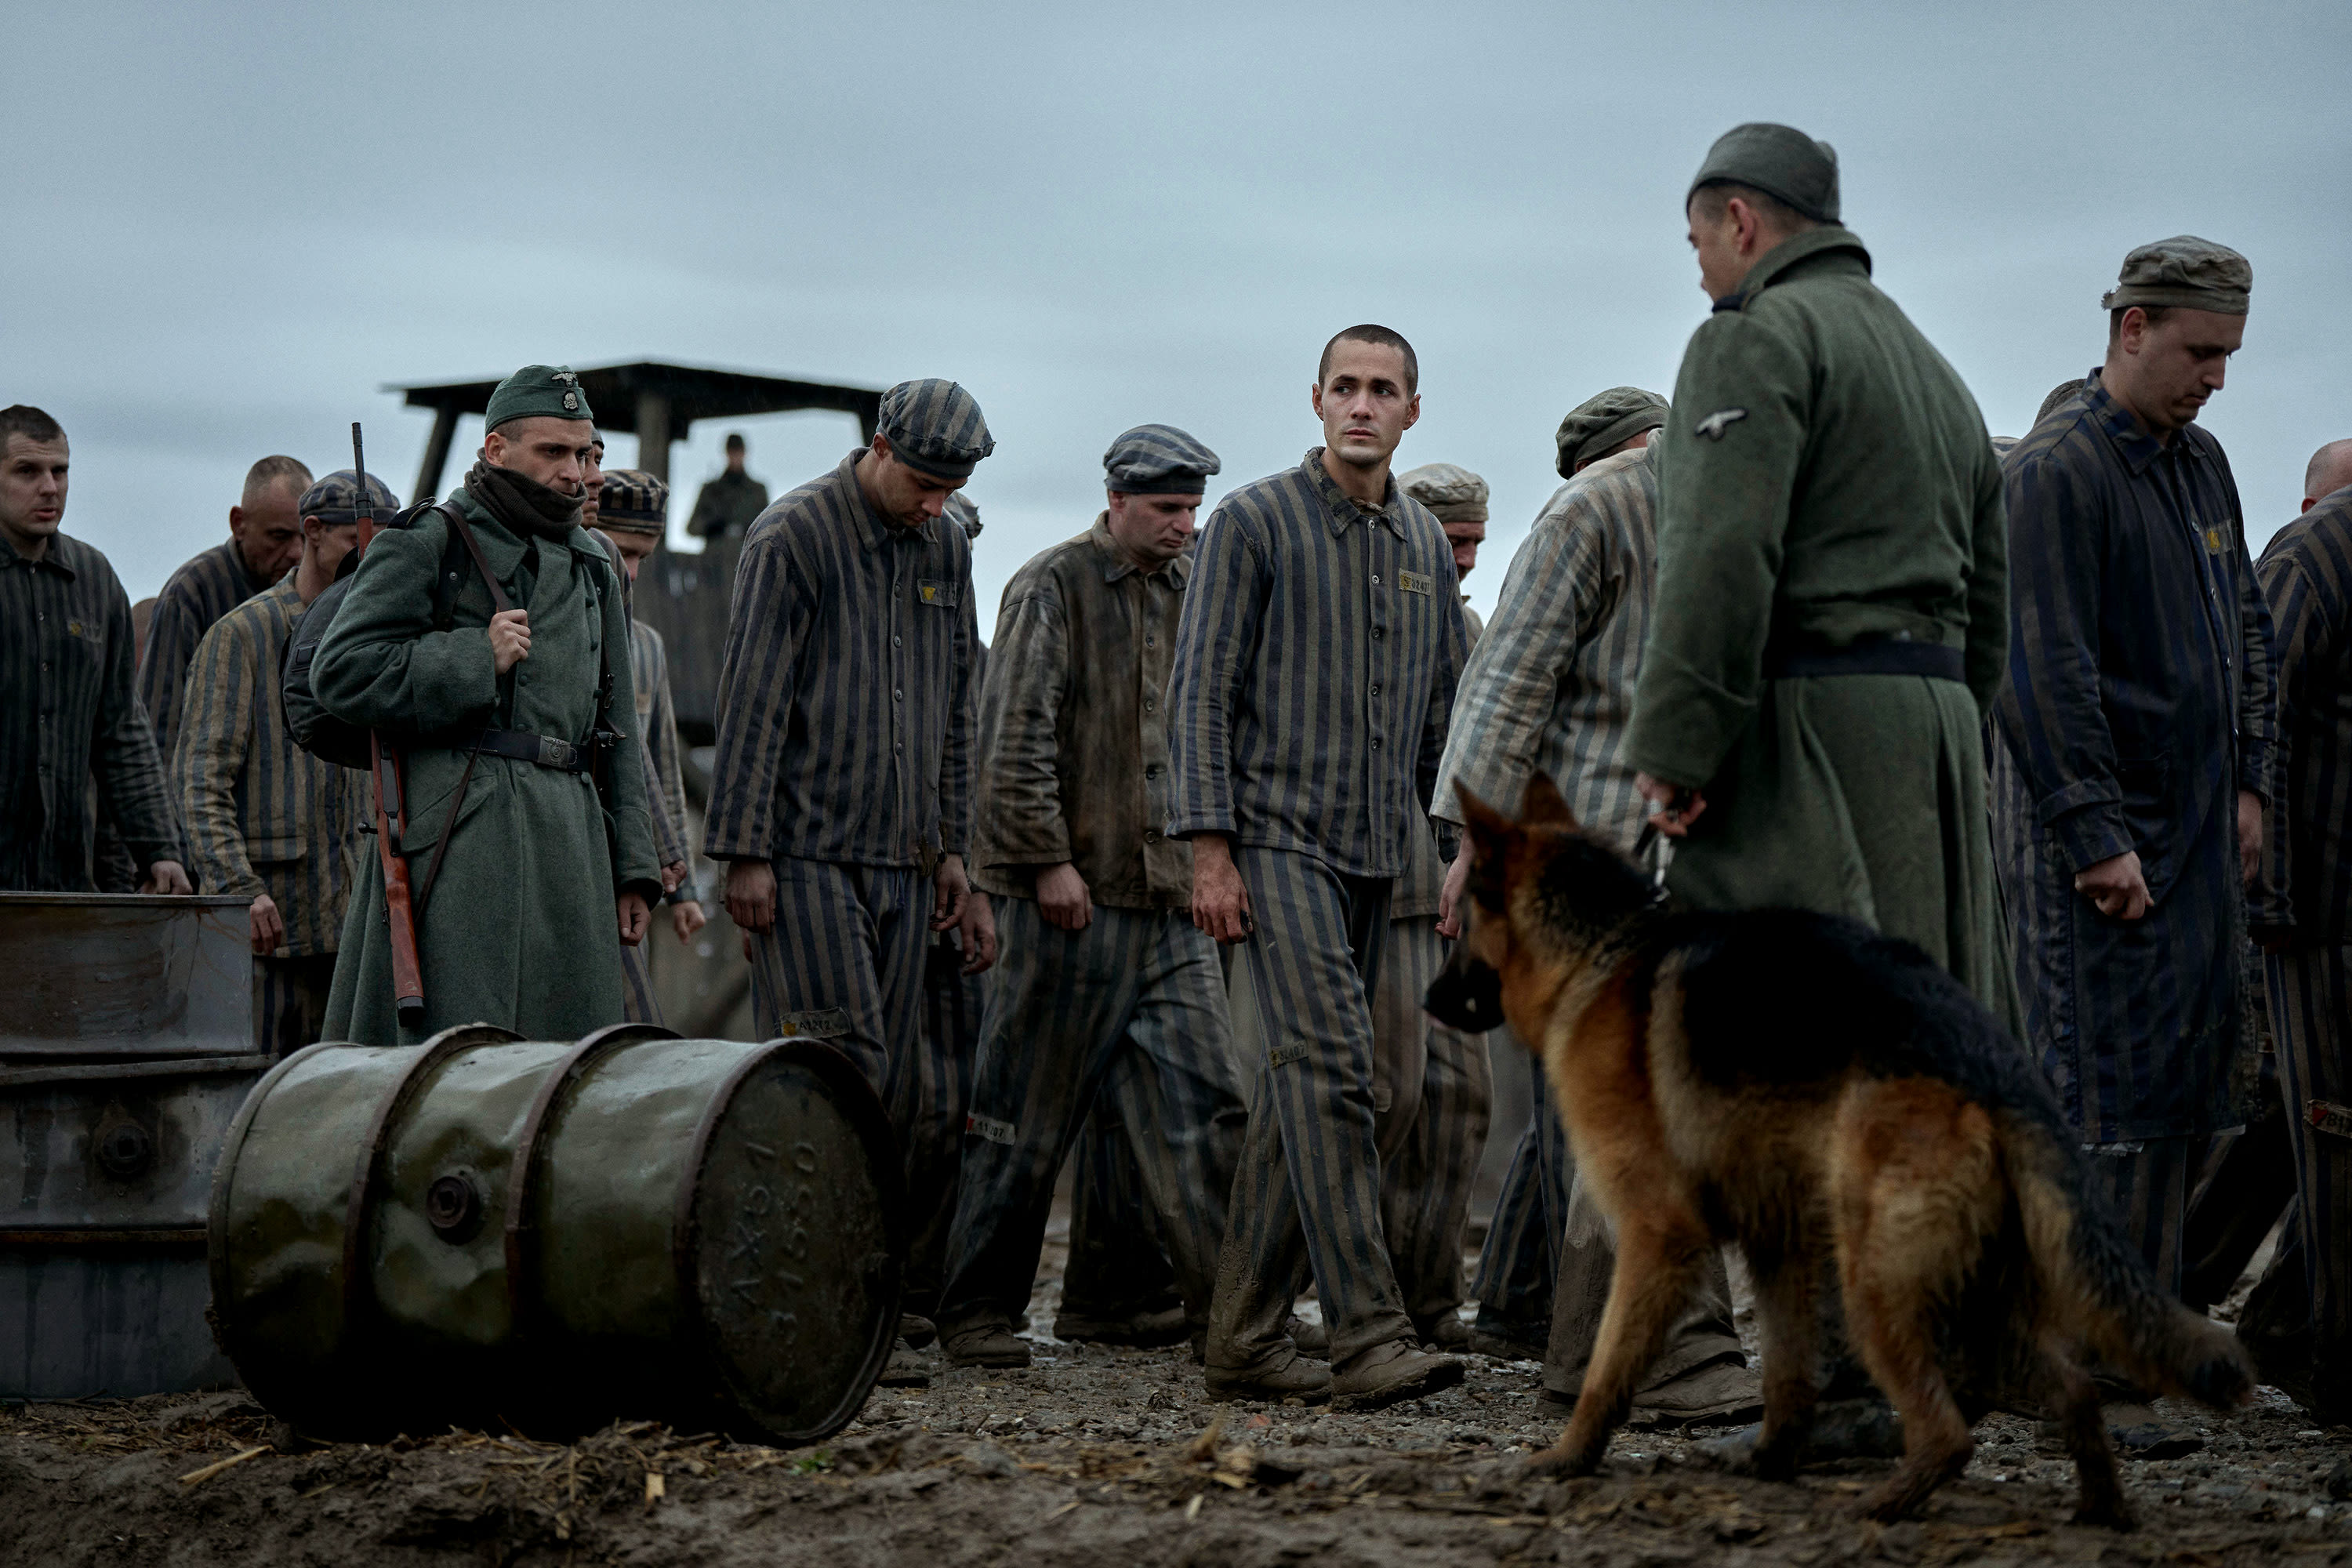 Several new World War II-set TV series aim to portray life beyond conflict and survival